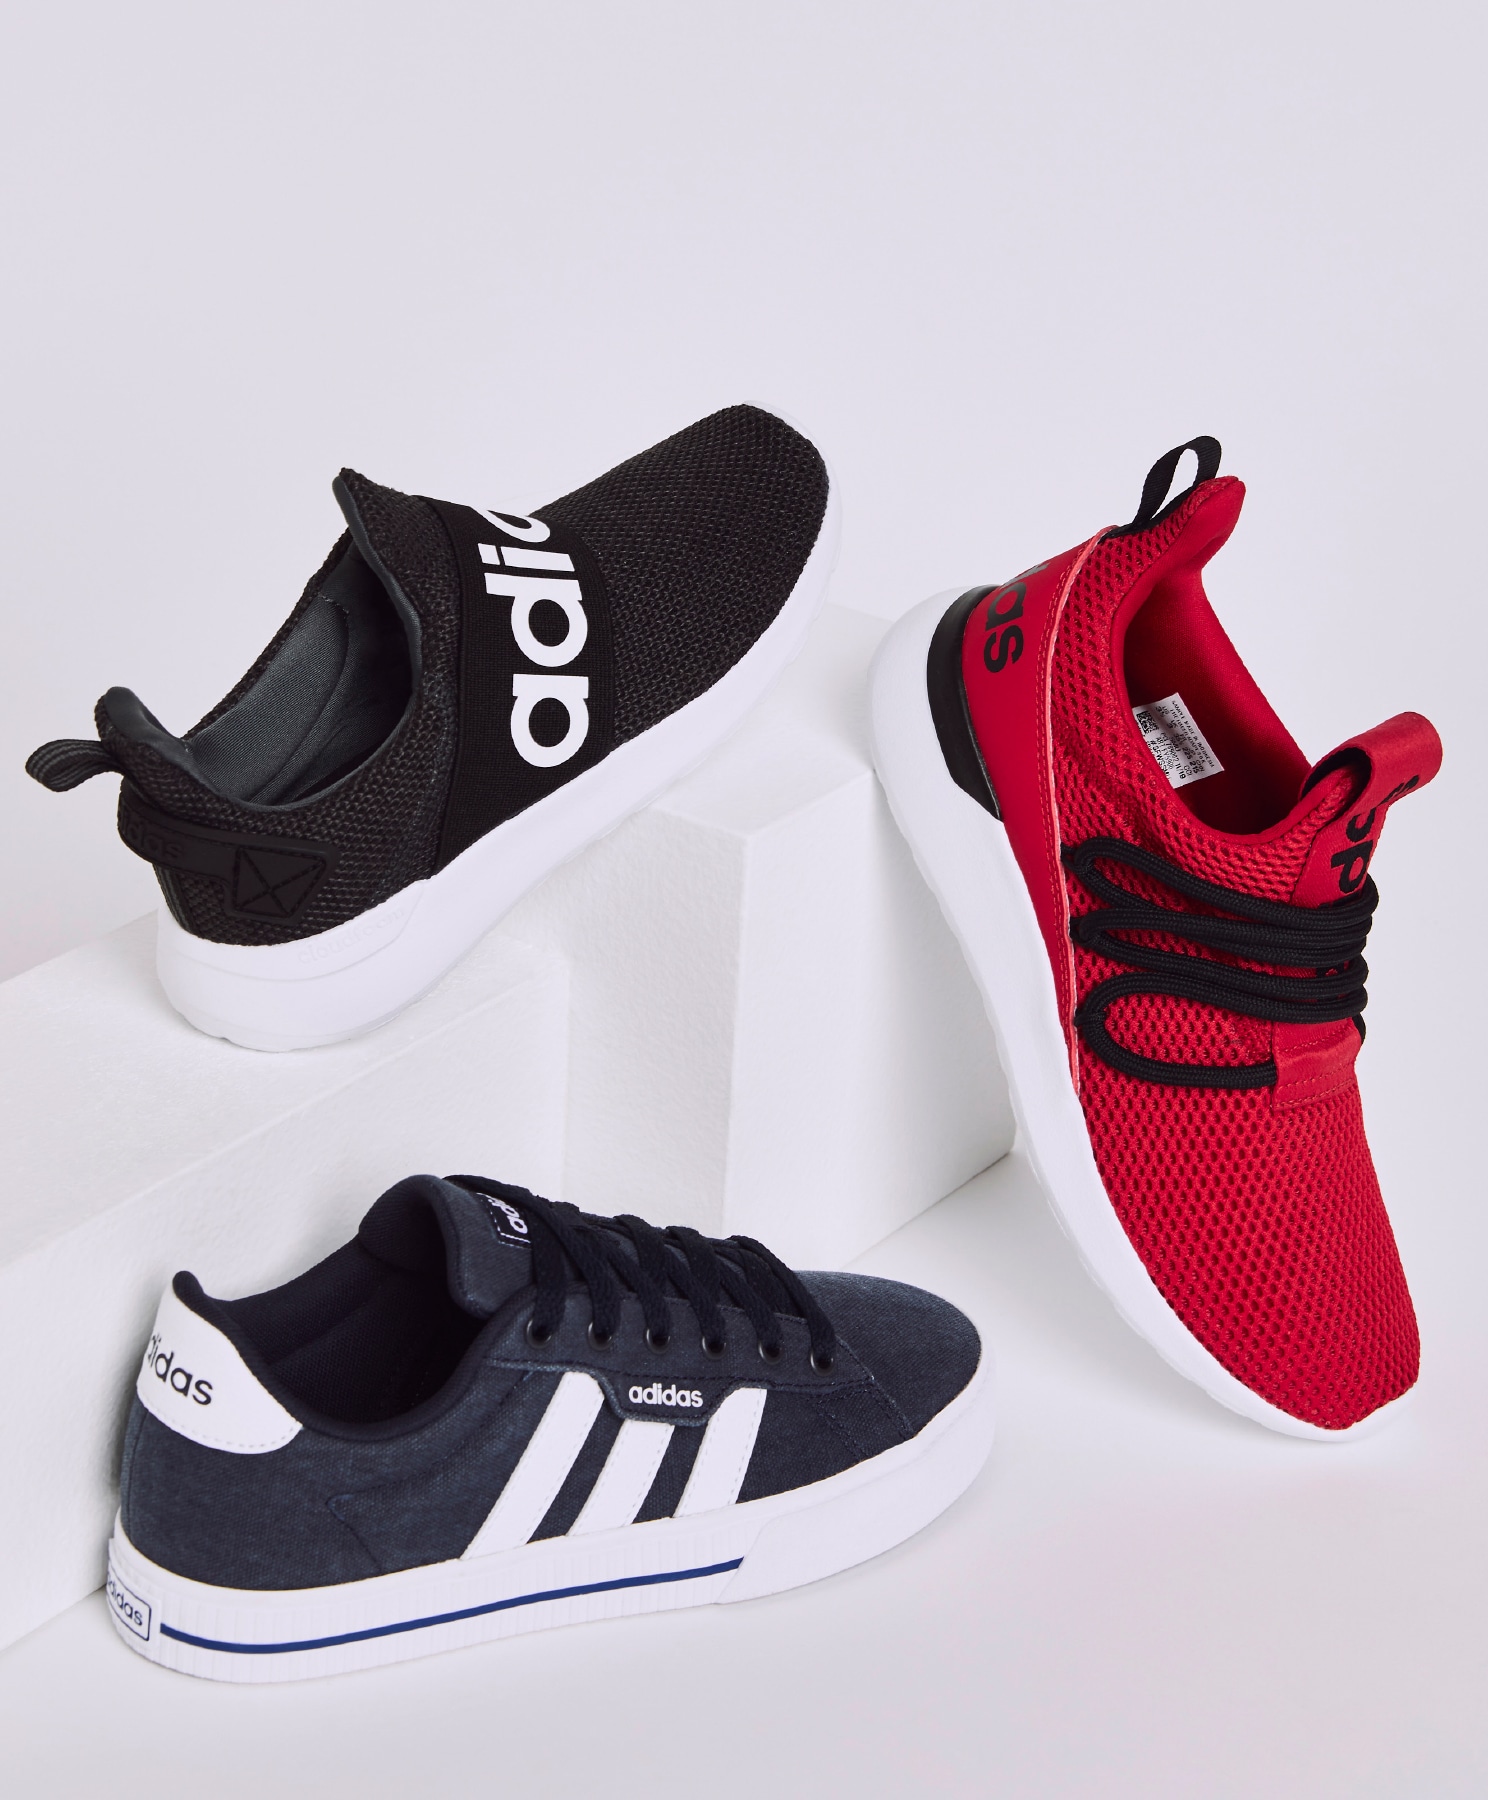 adidas skate shoes red